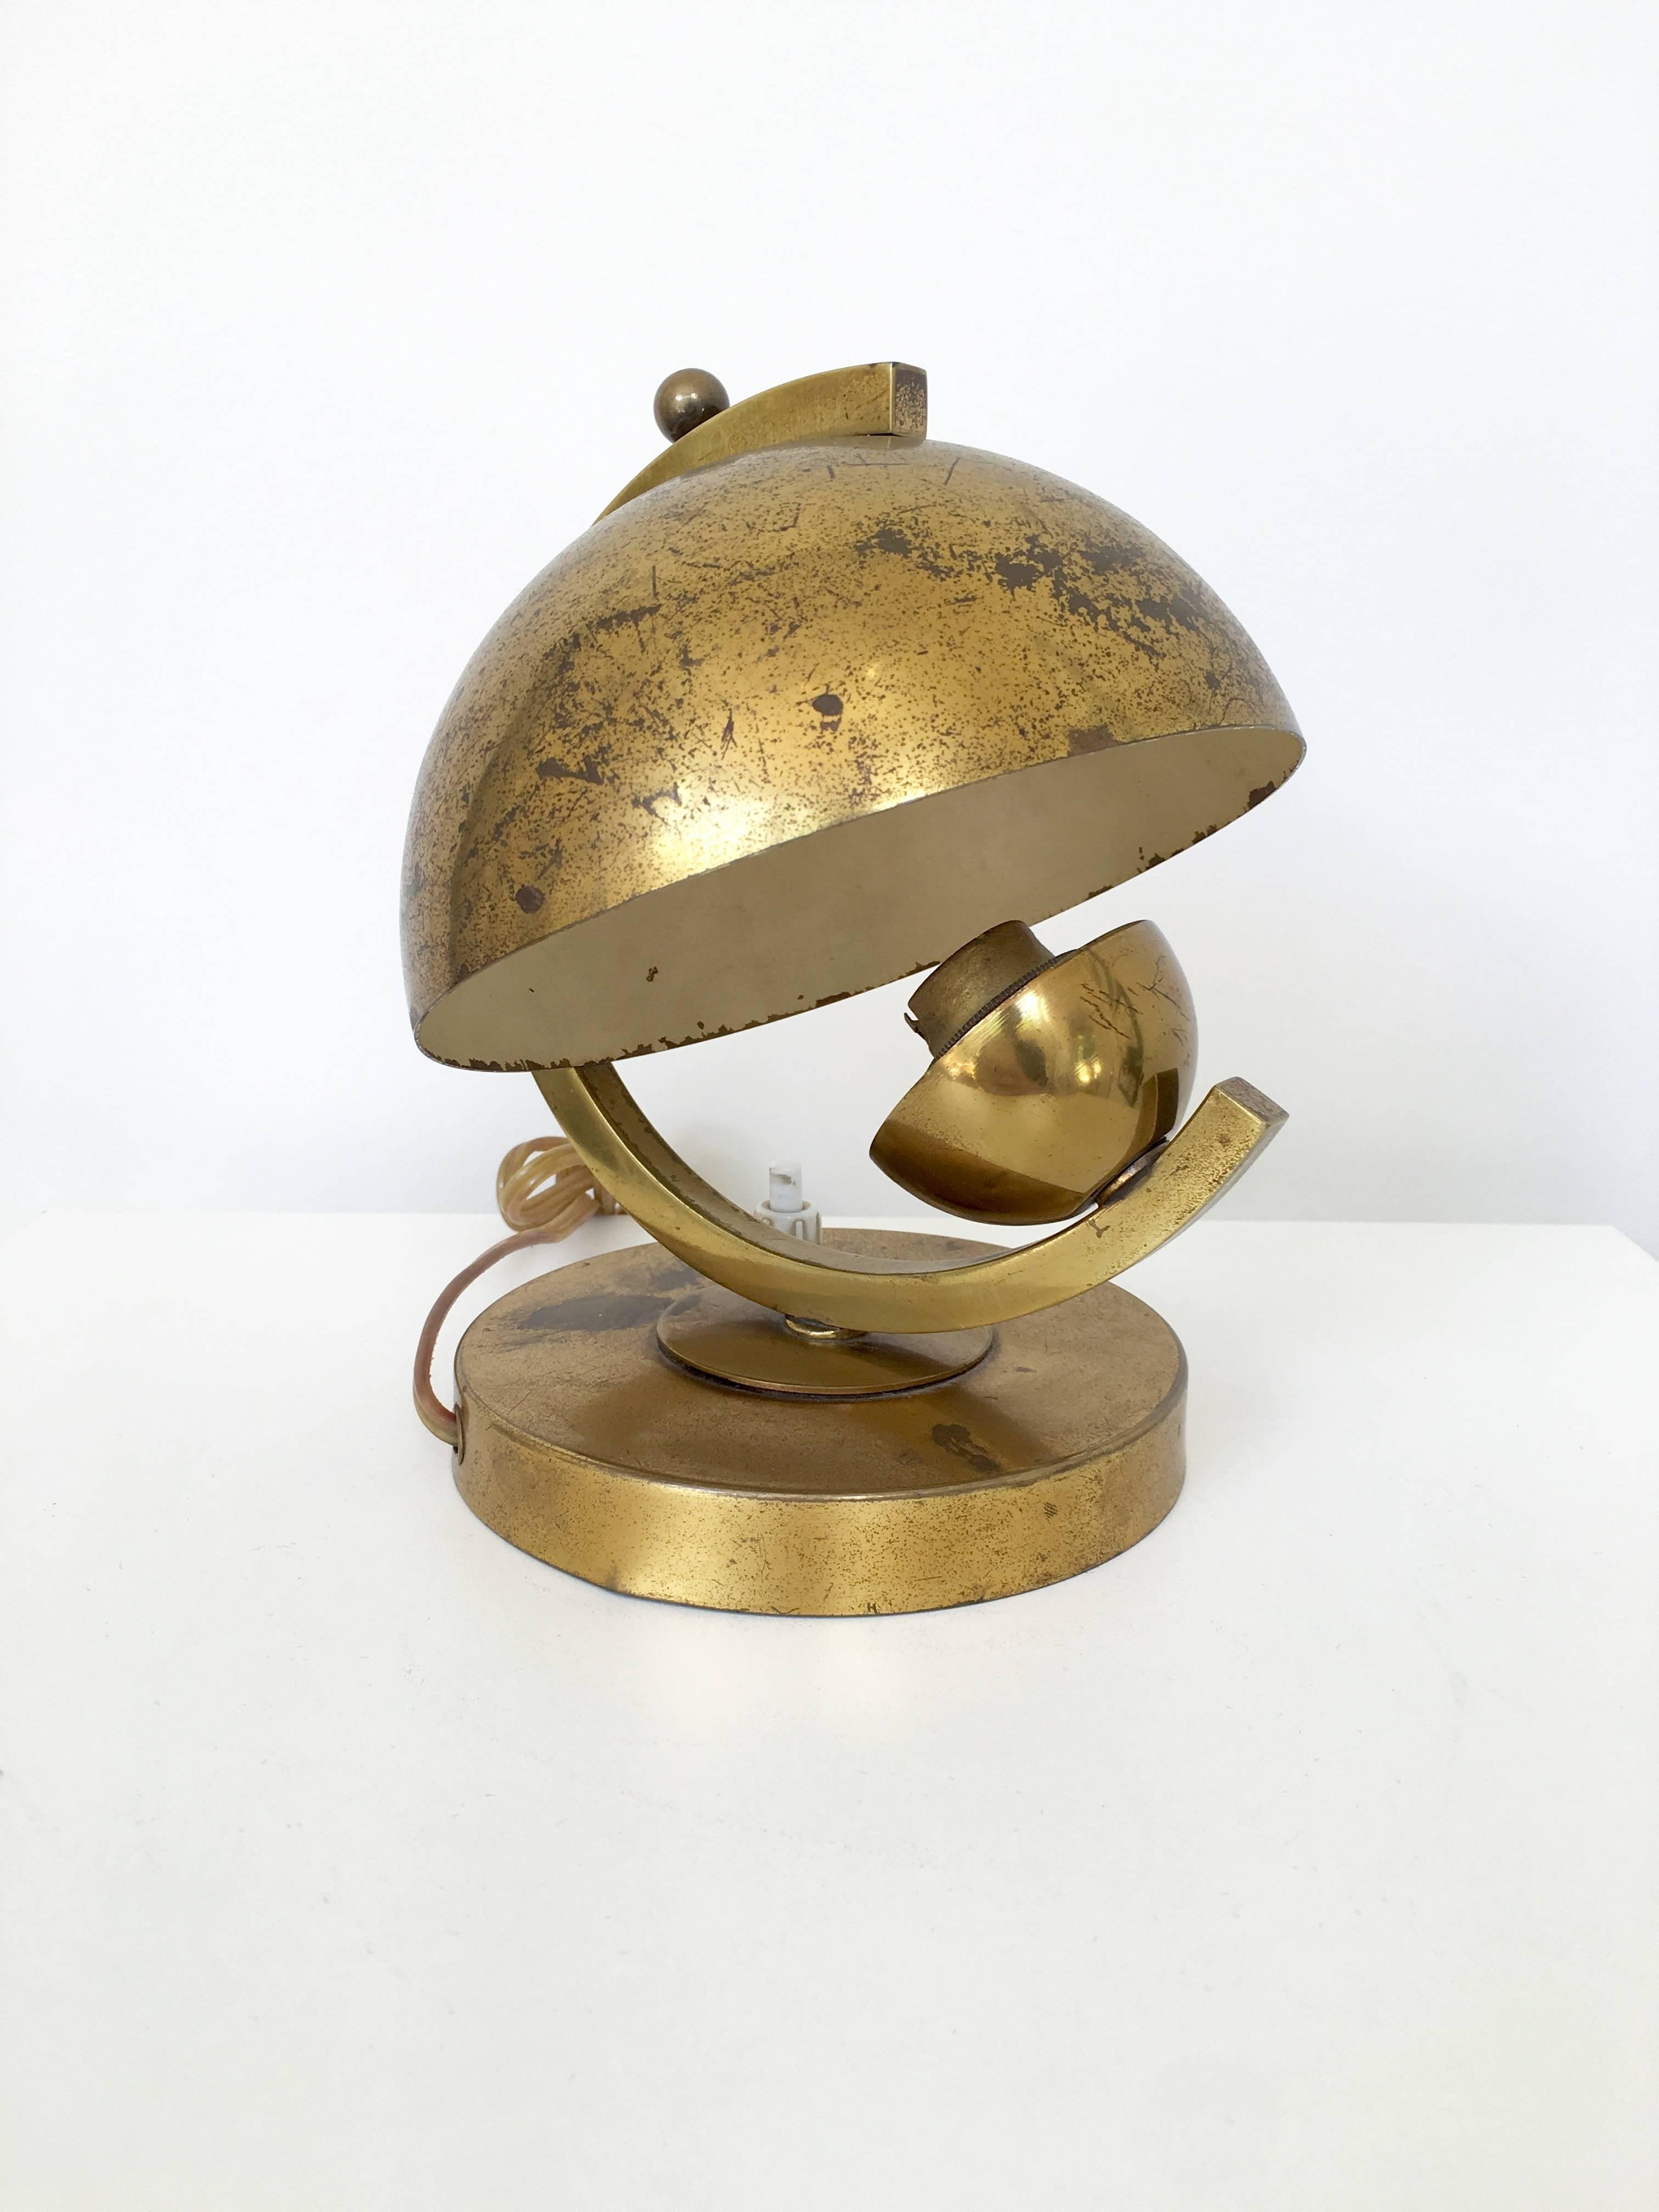 A petite and Classic Art Deco brass lamp in the style of Jacques Adnet and from the 1940s. The lamp is in it's original European wiring and has a wonderful aged patina.